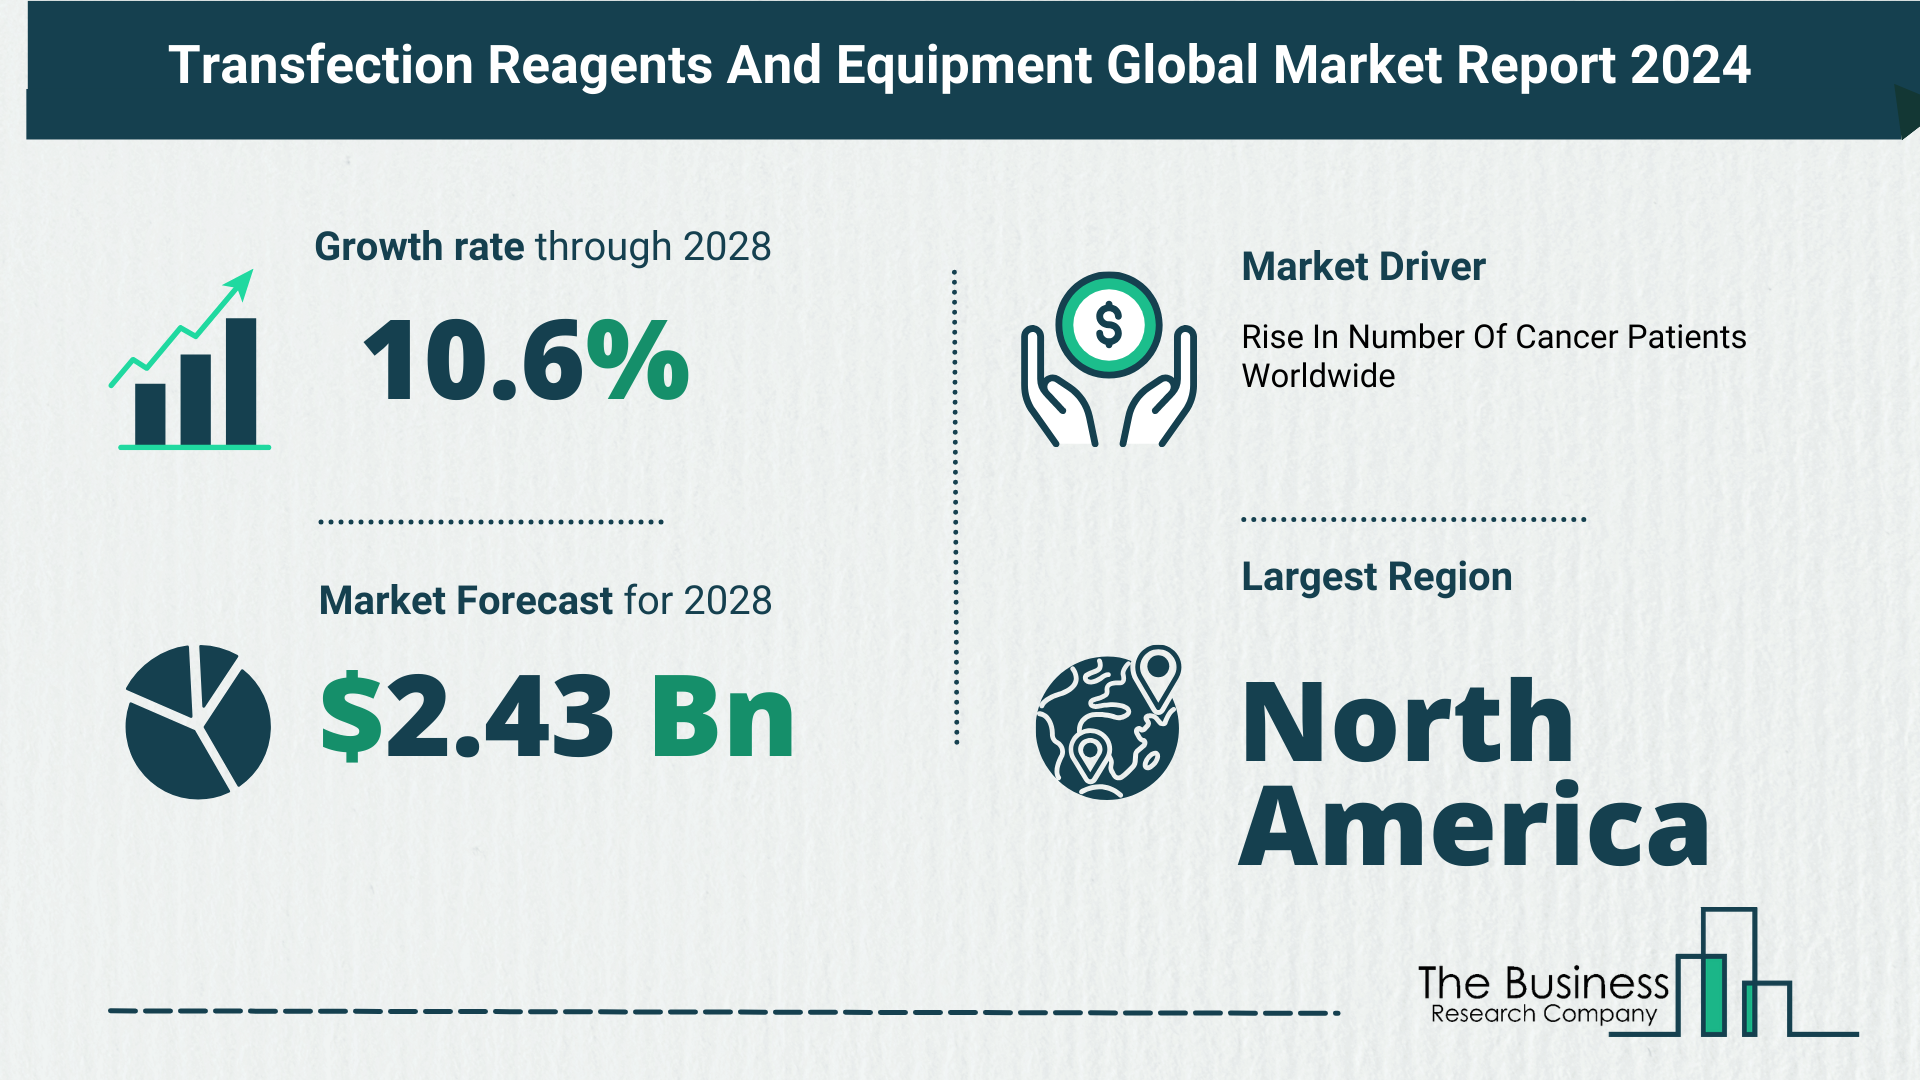 Overview Of The Transfection Reagents And Equipment Market 2024: Size, Drivers, And Trends